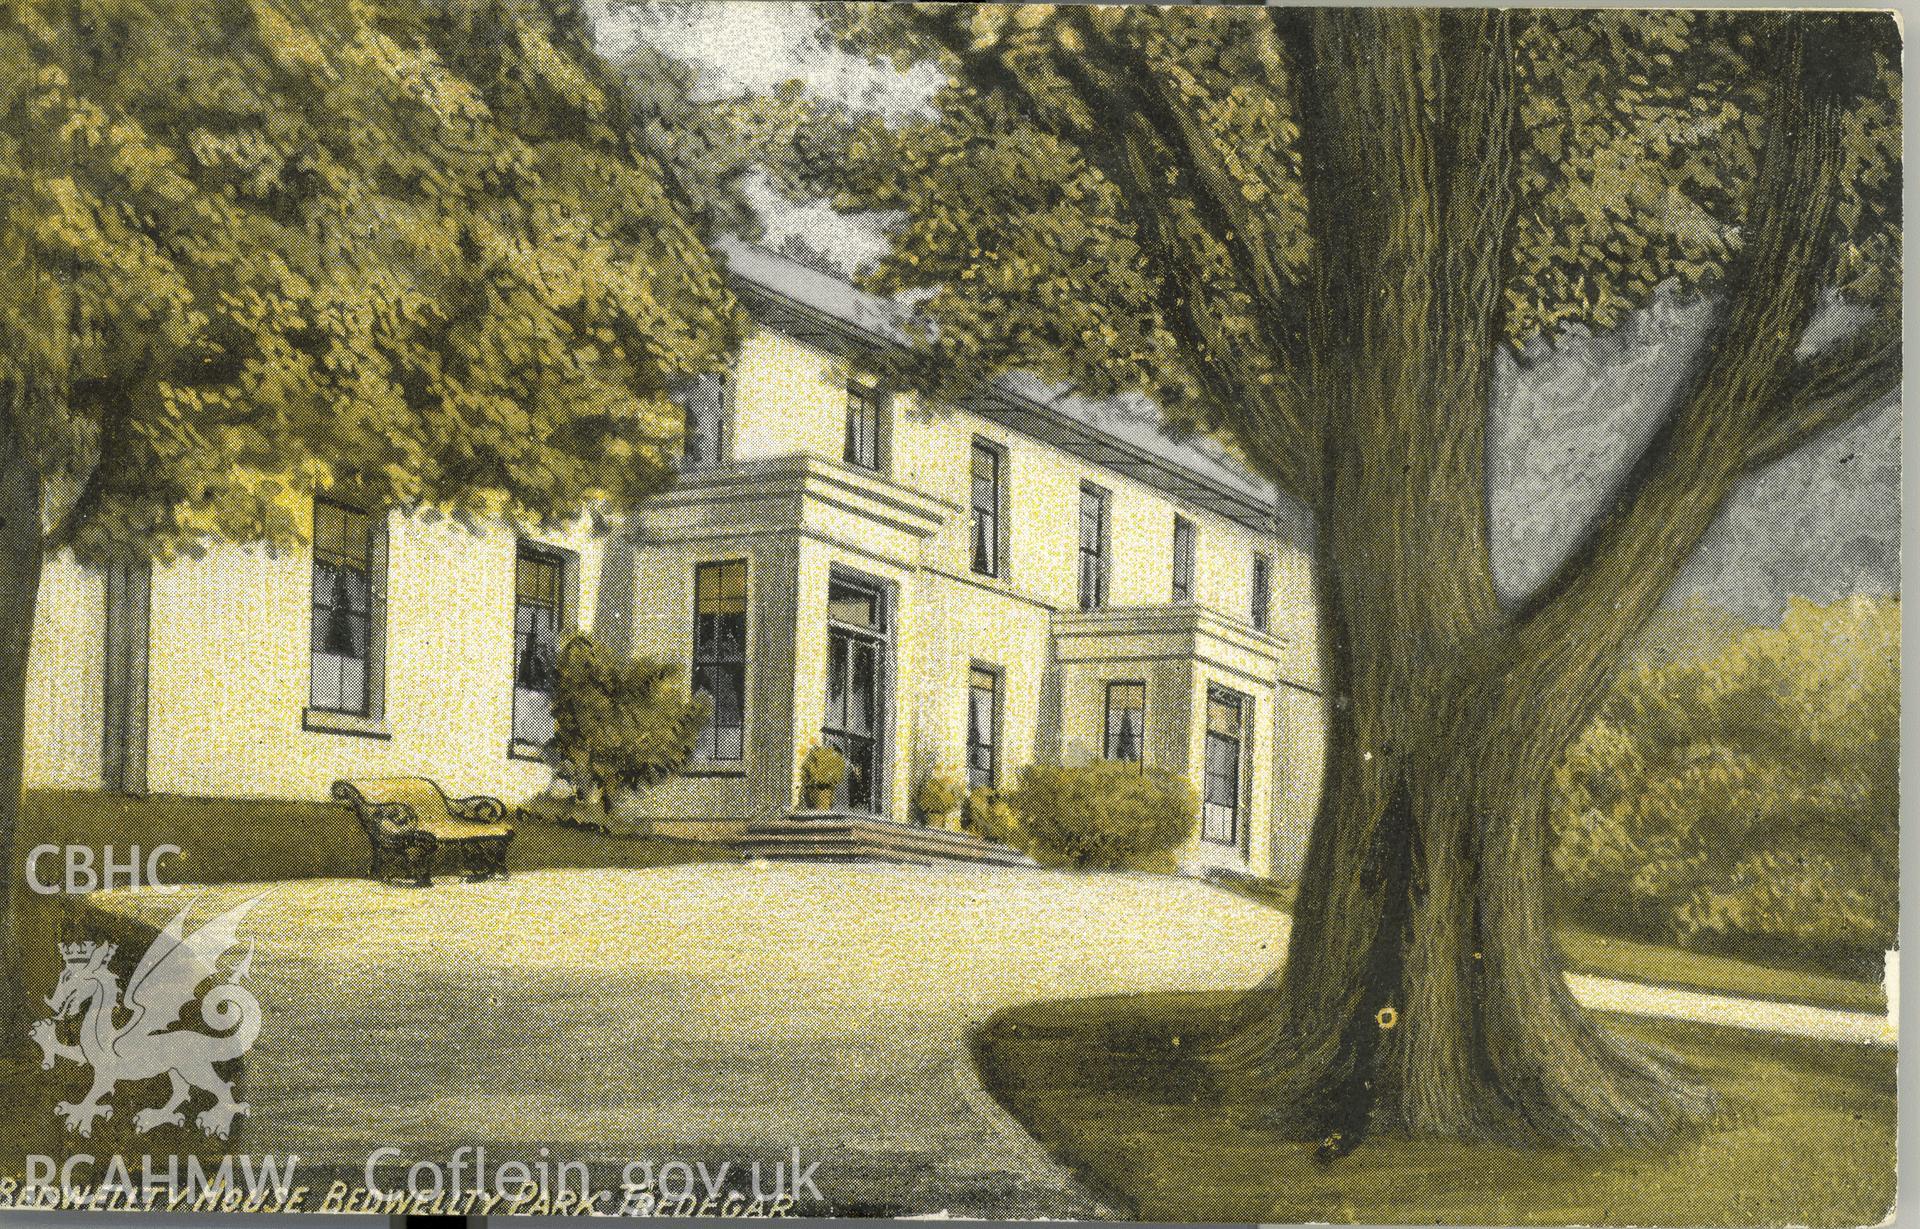 Digitised postcard image of Bedwellty House, Tredegar. Produced by Parks and Gardens Data Services, from an original item in the Peter Davis Collection at Parks and Gardens UK. We hold only web-resolution images of this collection, suitable for viewing on screen and for research purposes only. We do not hold the original images, or publication quality scans.